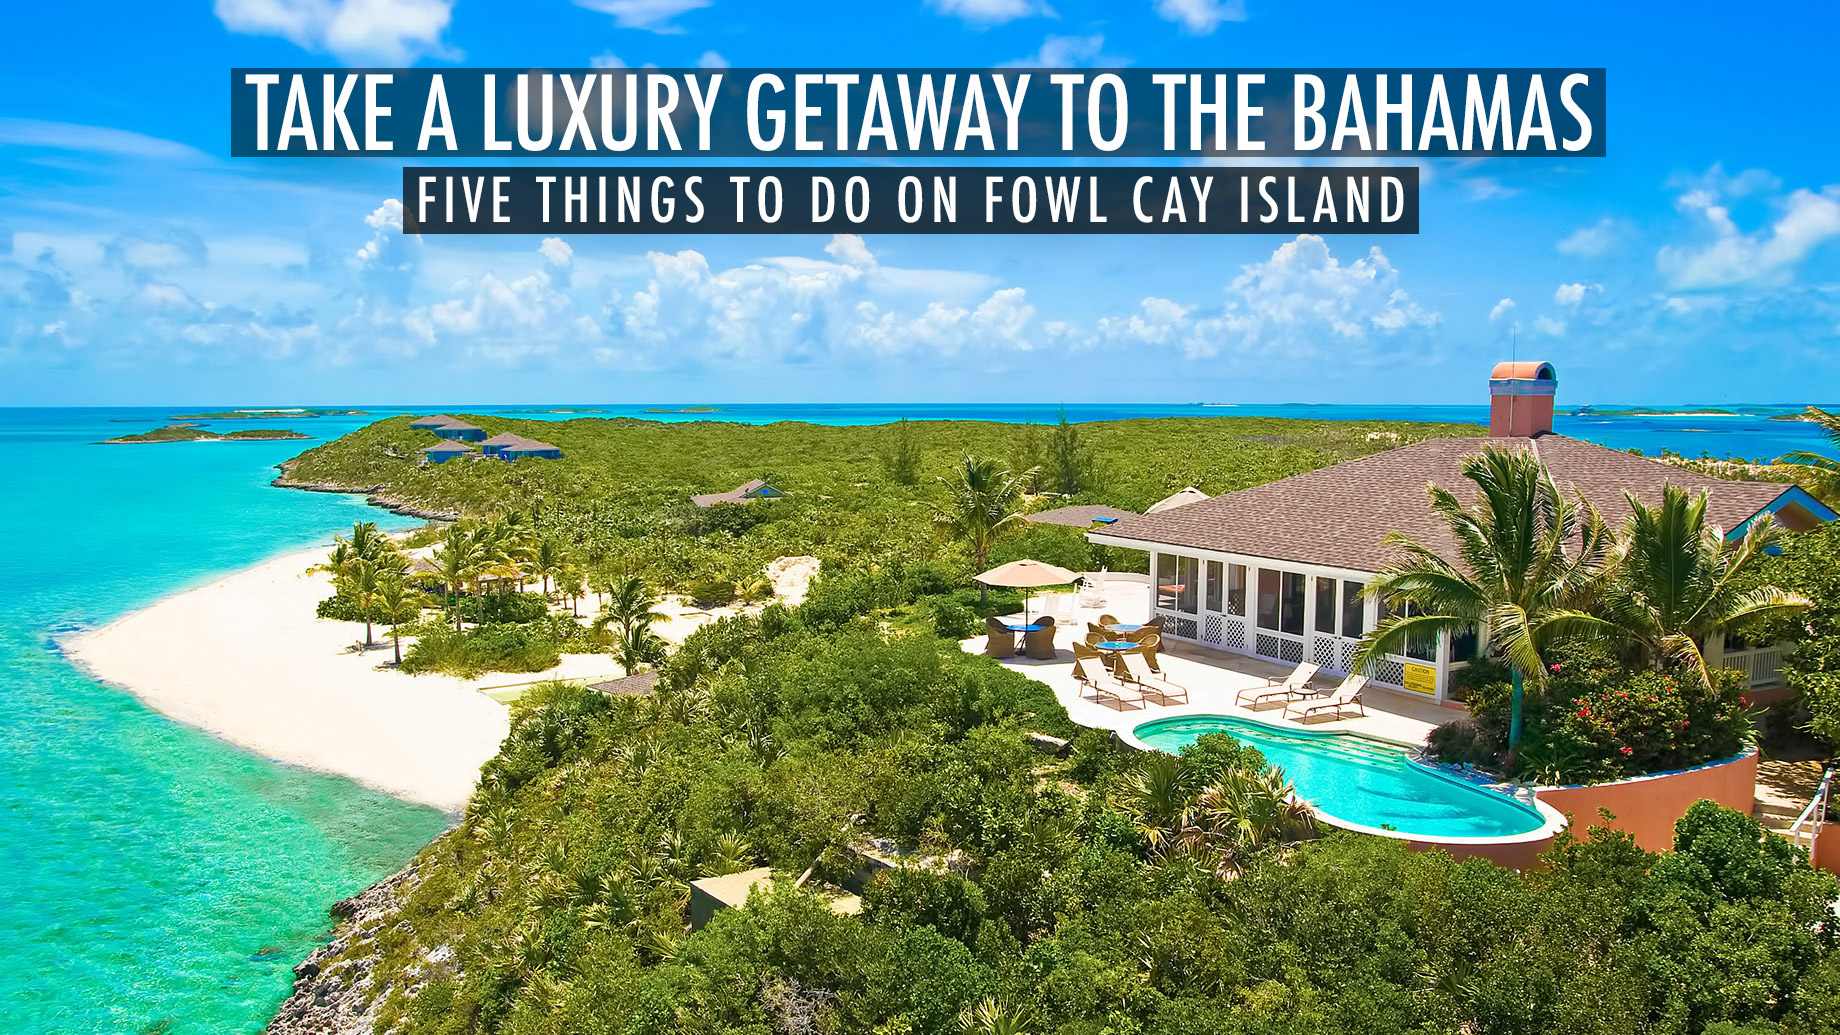 Take A Luxury Getaway To The Bahamas – Five Things To Do On Fowl Cay Island